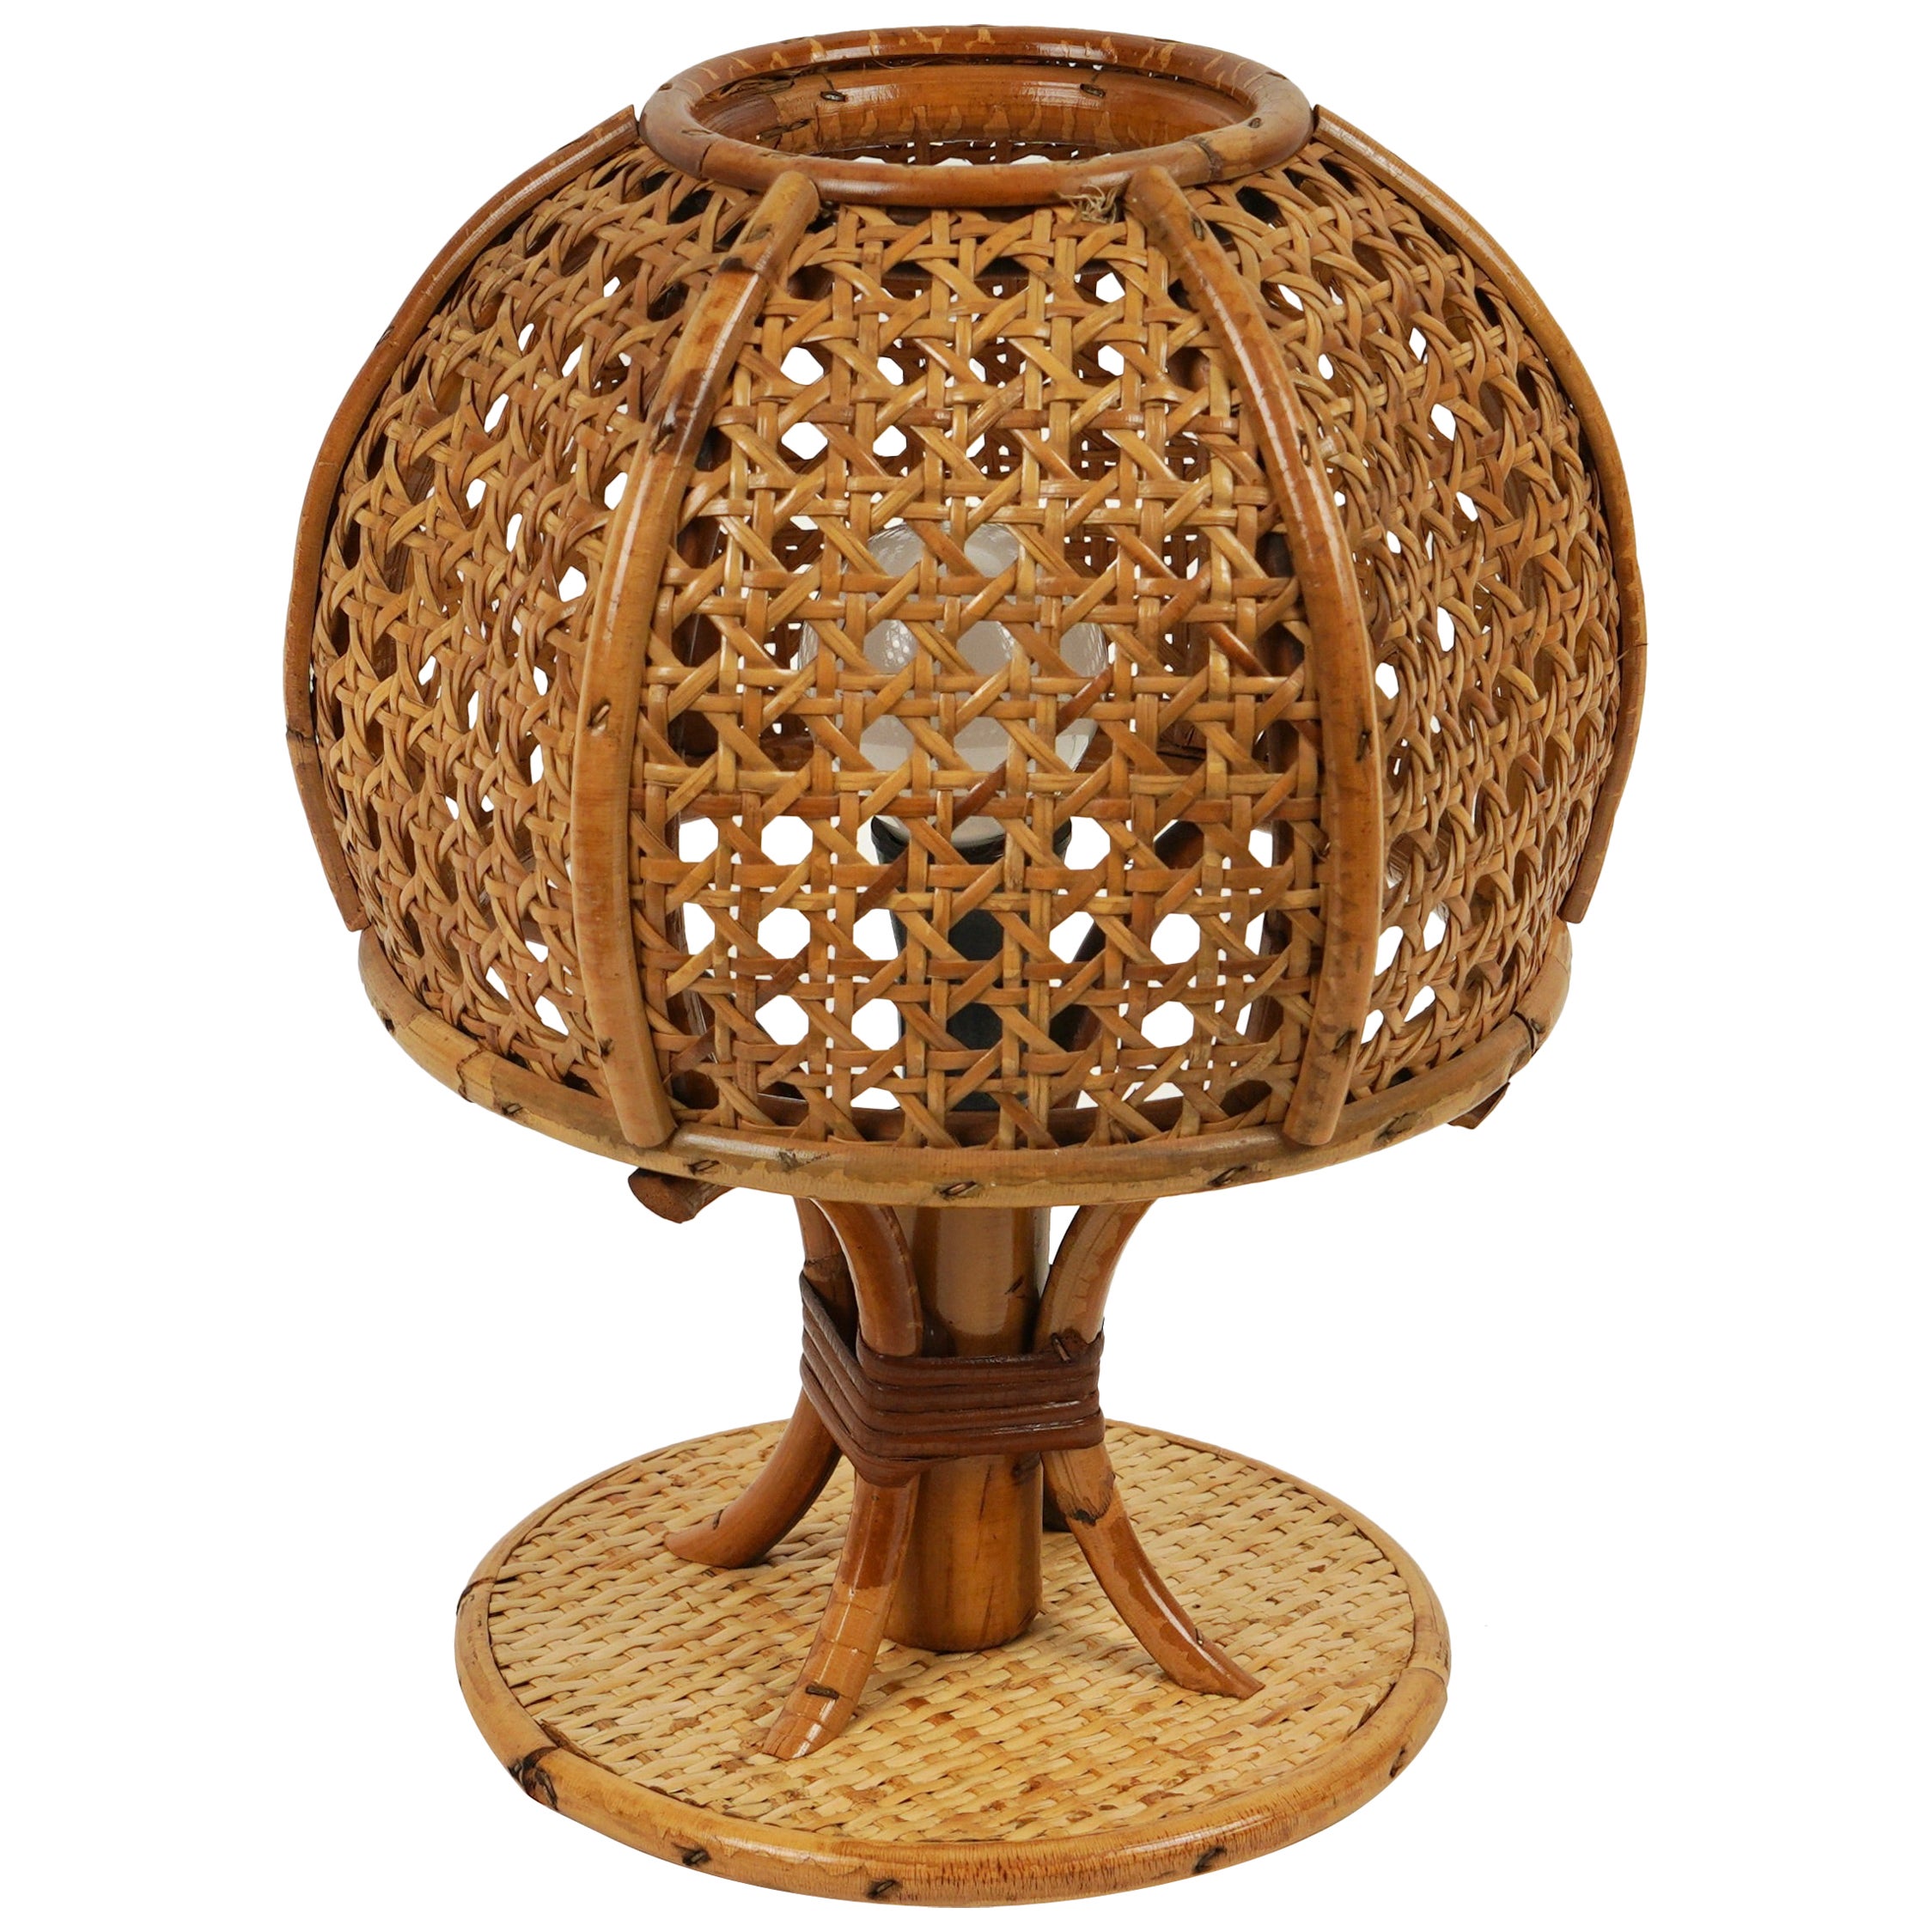 Midcentury Rattan and Wicker Table Lamp Louis Sognot Style, Italy, circa 1970s